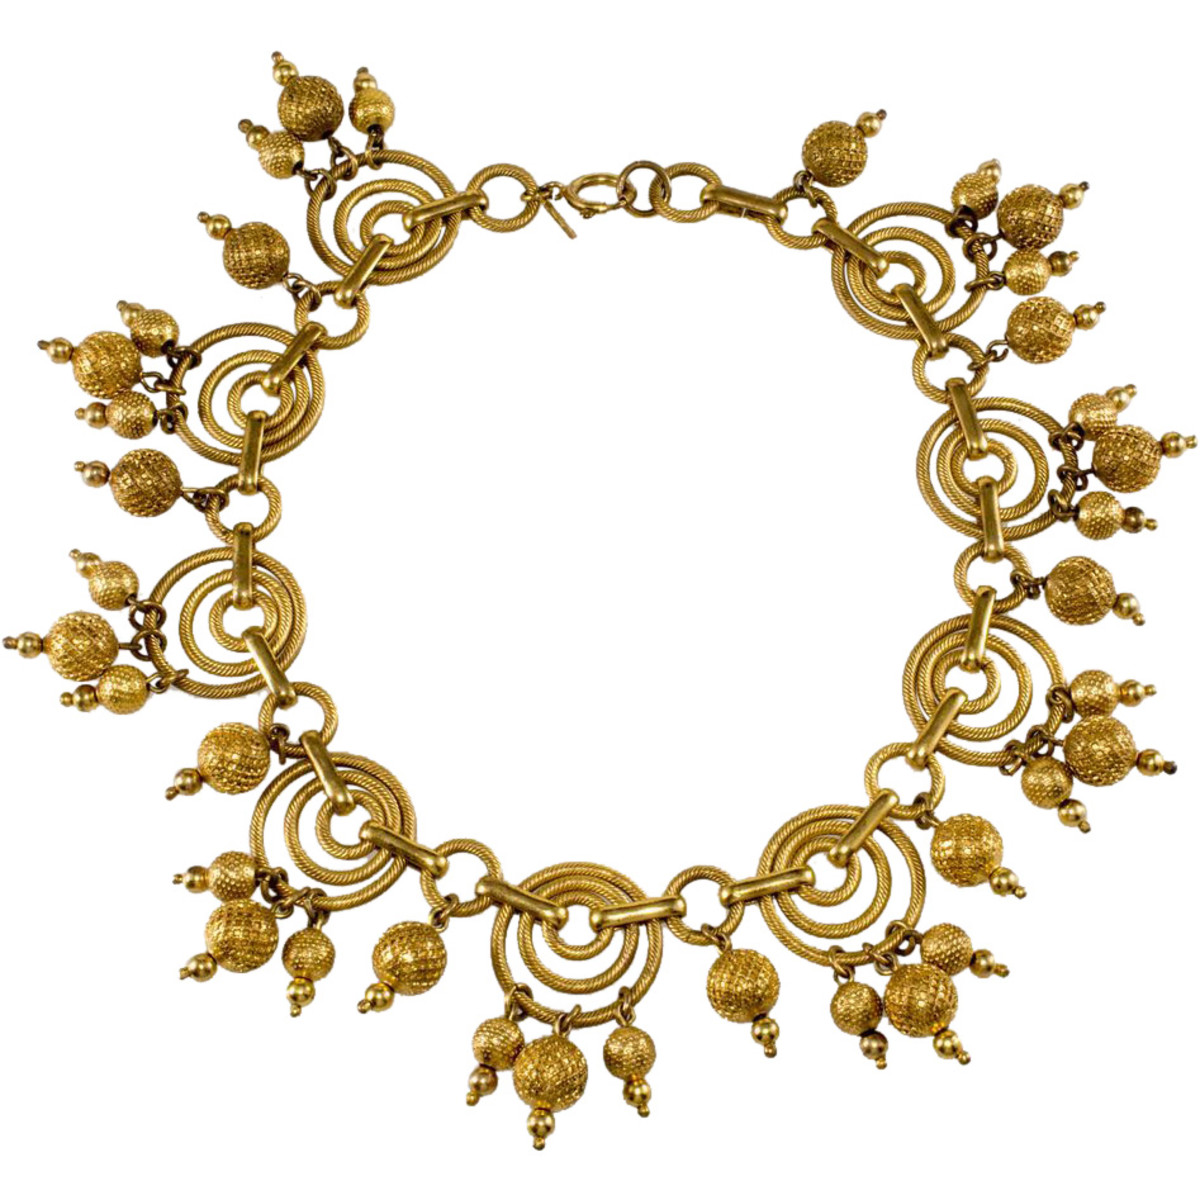 Monet Jewelers gold-plated necklace, c. 1939.